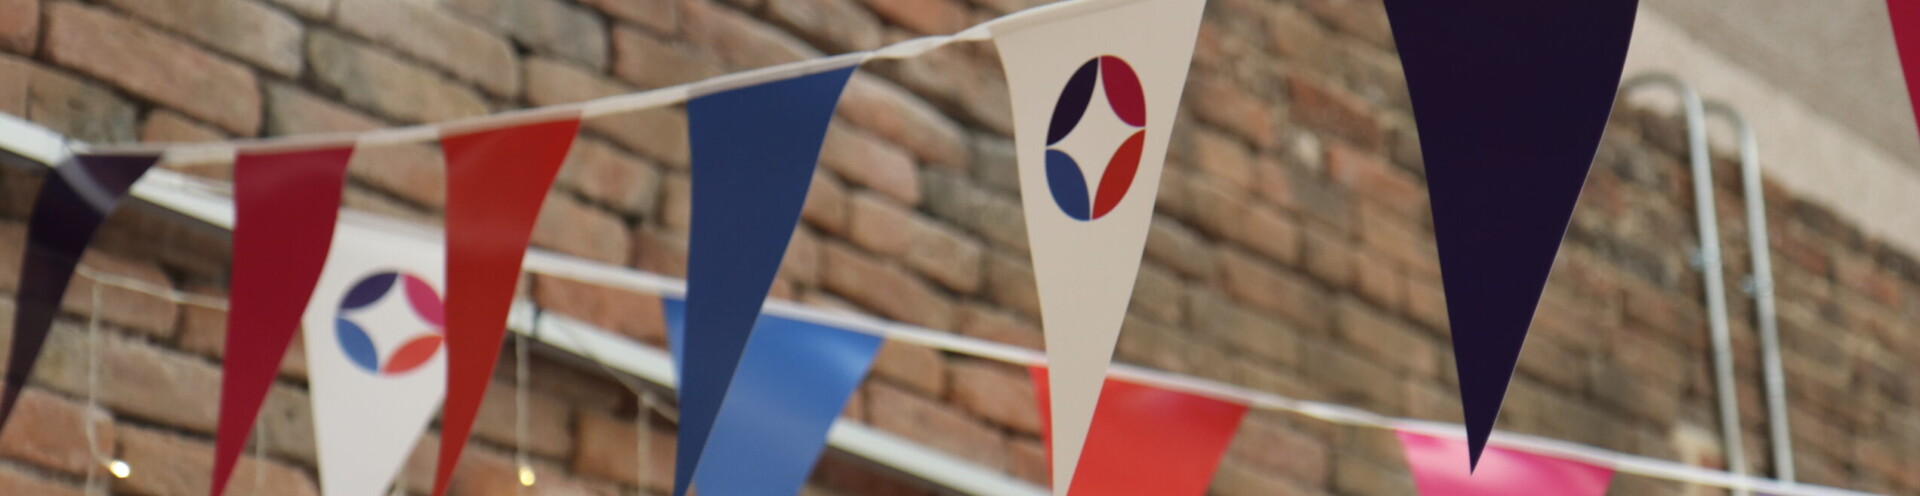 Photo of bunting flags with Barnwood Circle logo and brand colours of pink, purple. orange and blue.